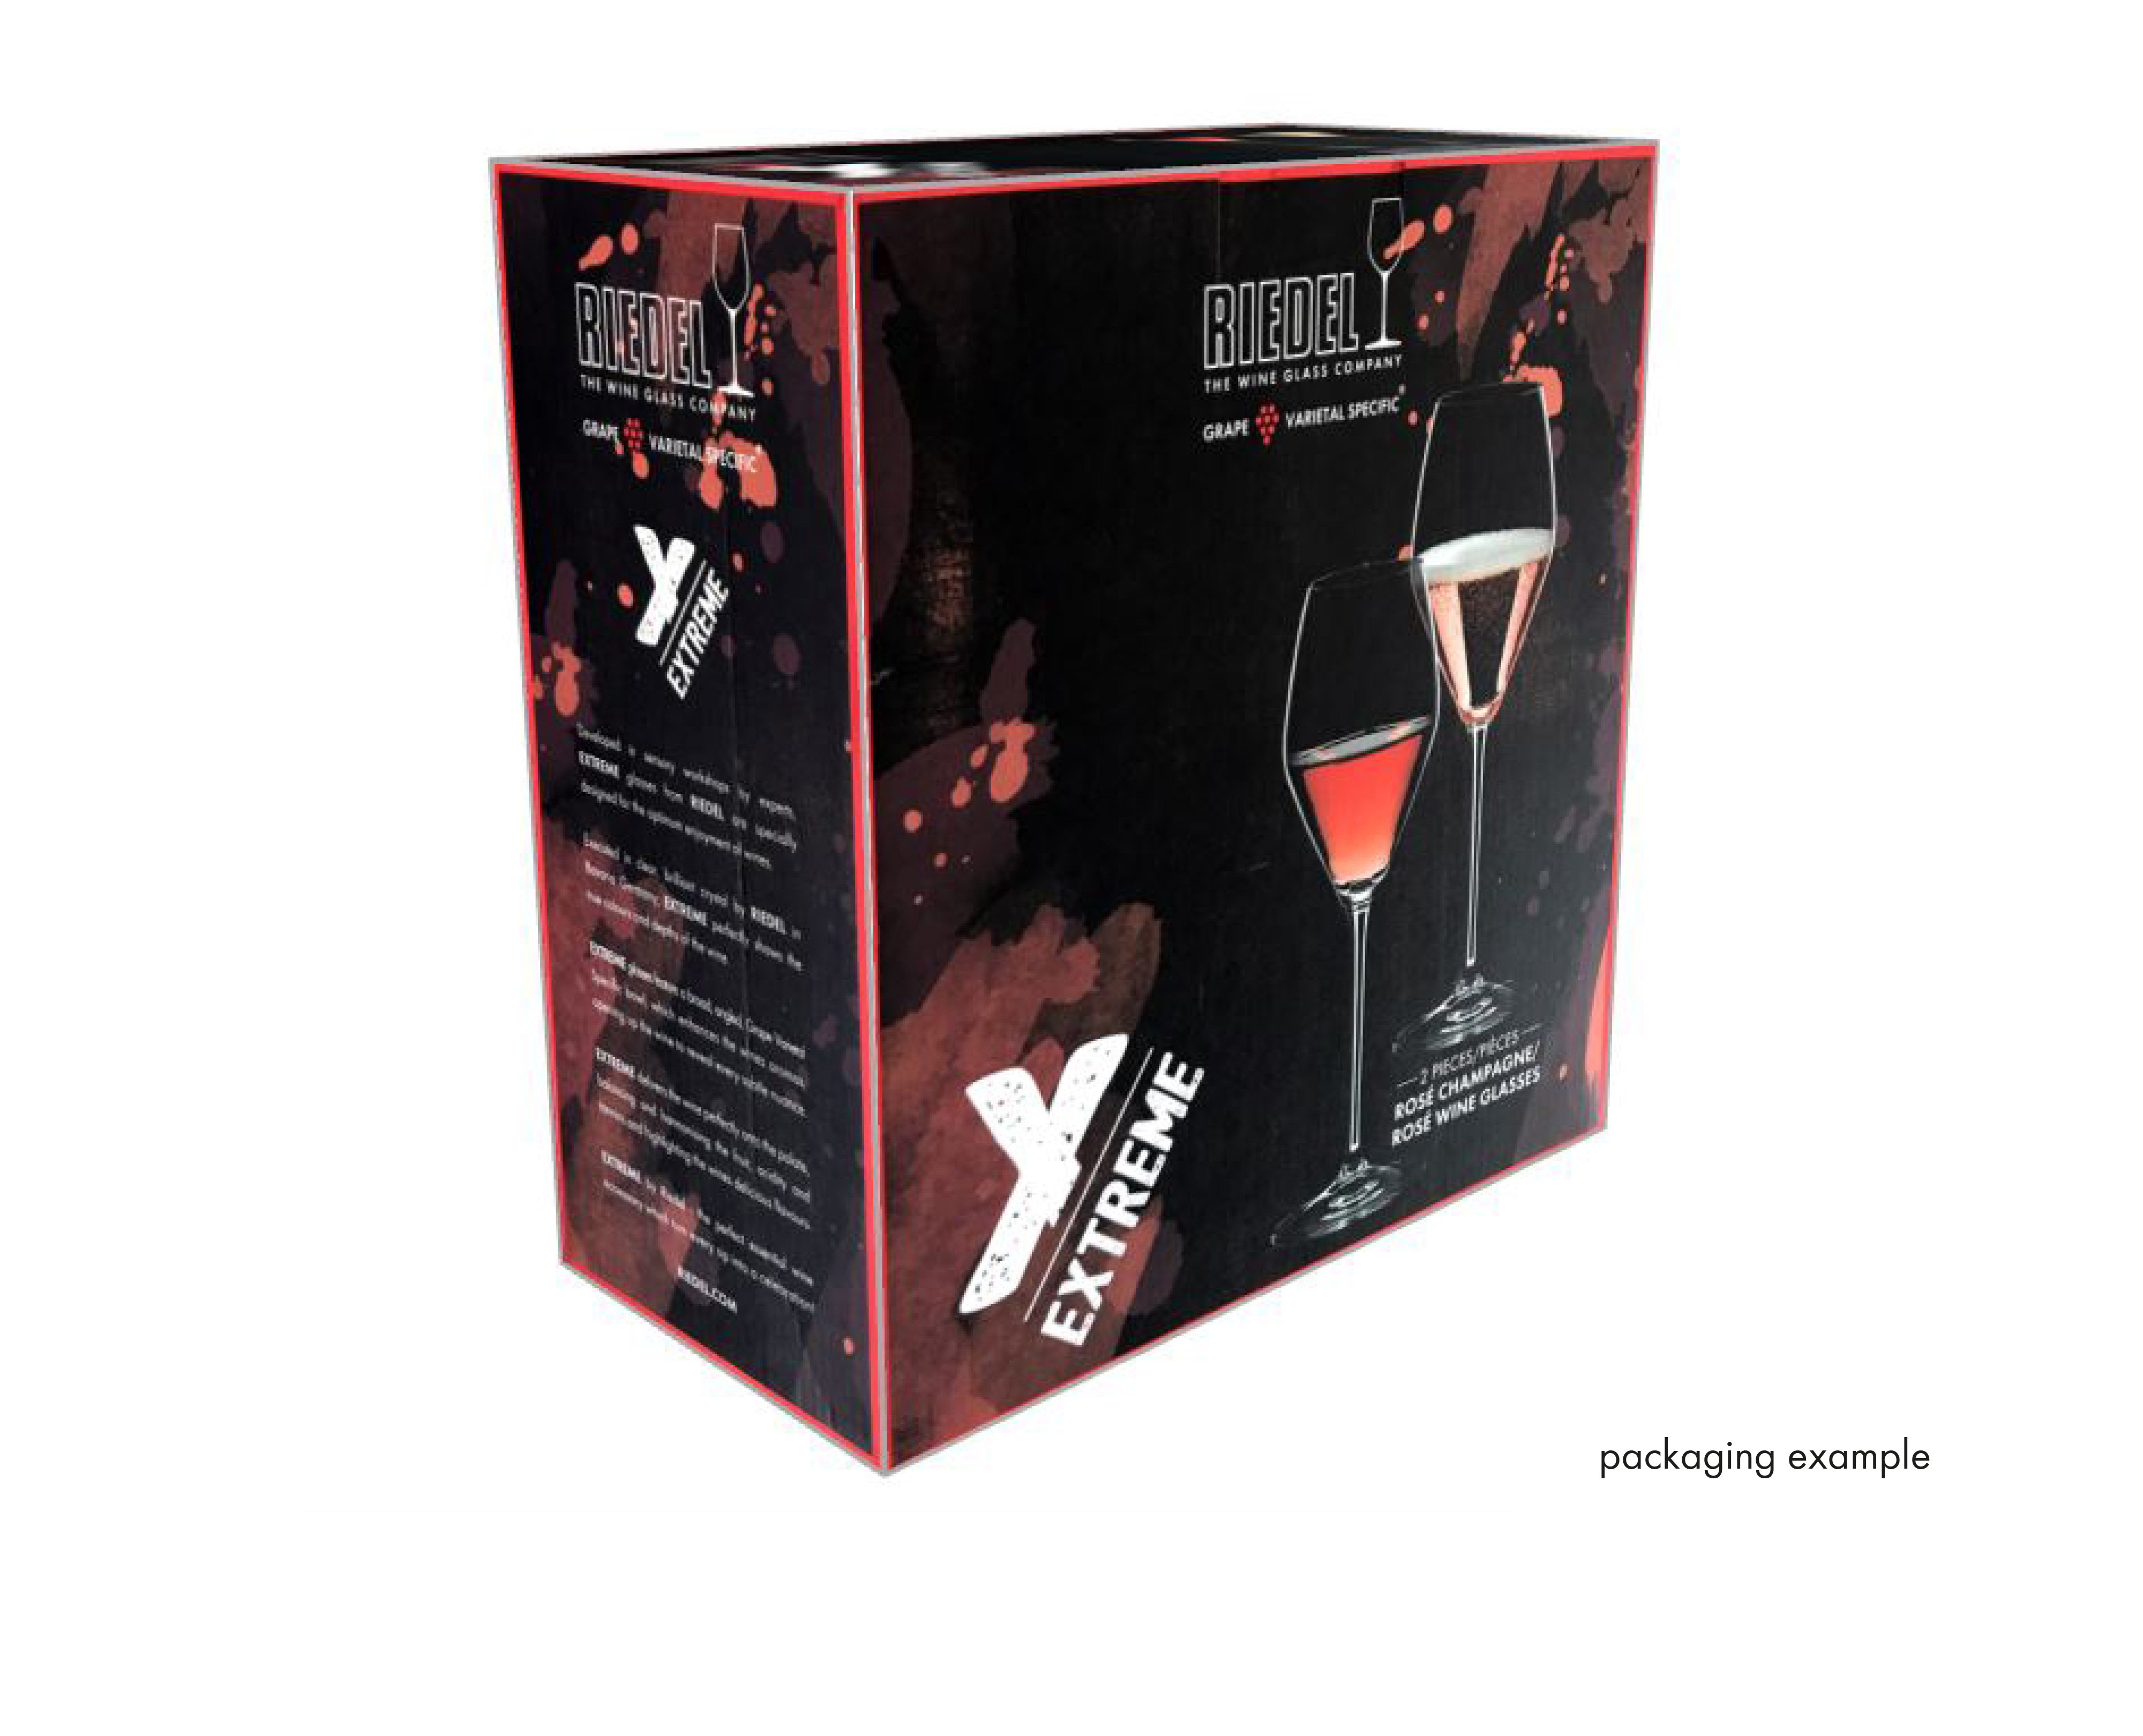 Stem Wine Glasses Riedel Extreme Rosé Wine / Rosé Champagne Glass Pair  Personalized Gift